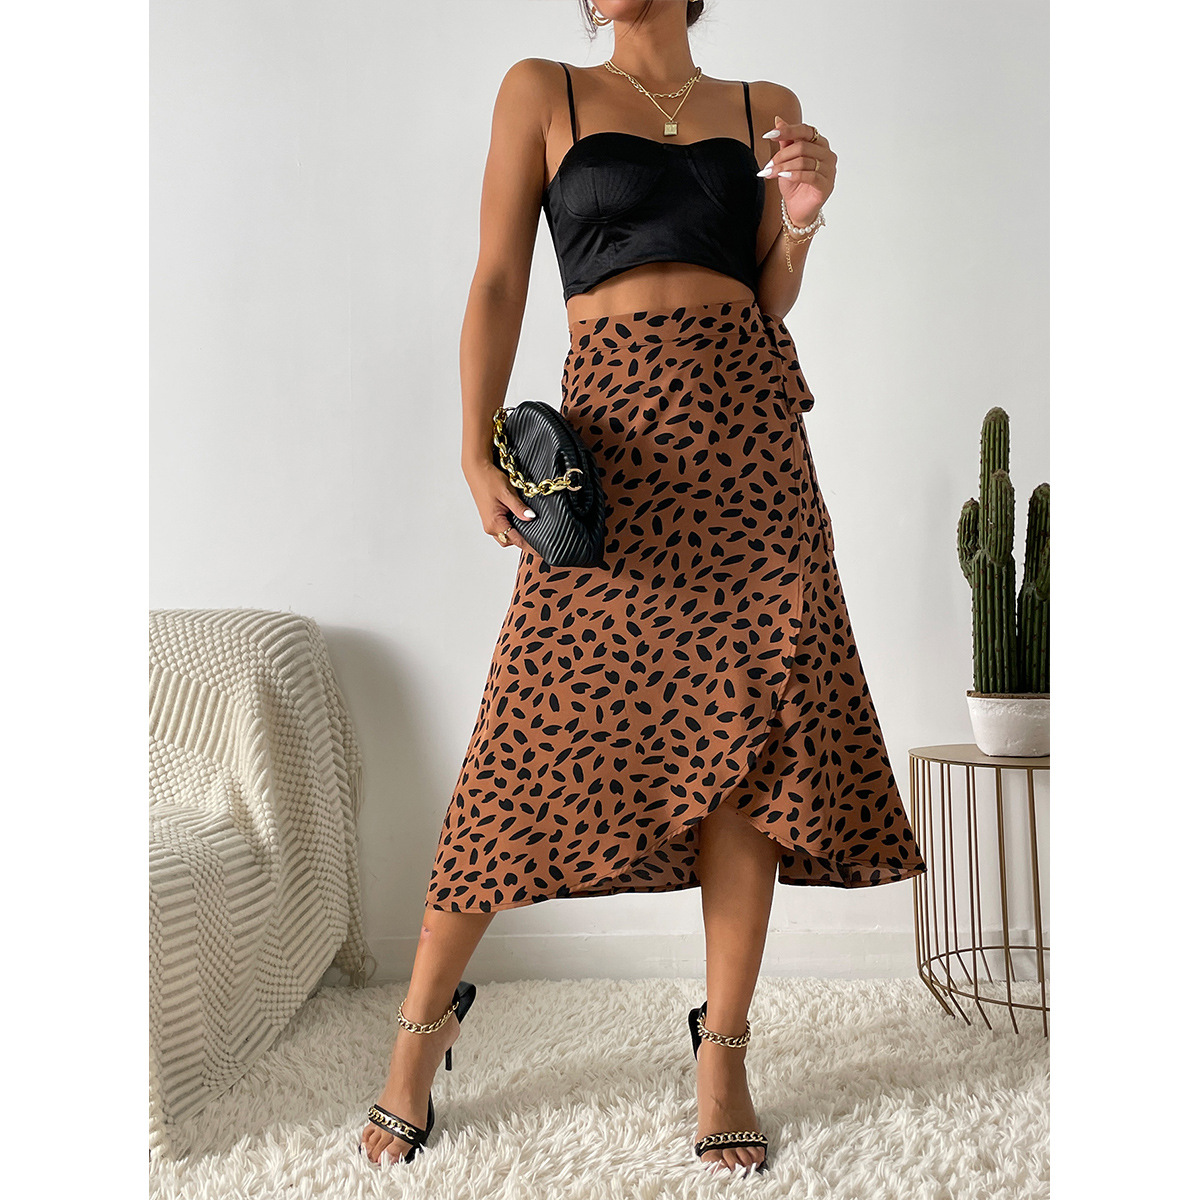 Amazon Cross-Border Women's Clothing European and American Casual All-Matching Graceful Polka Dot Floral Print Slit Skirt Fashion